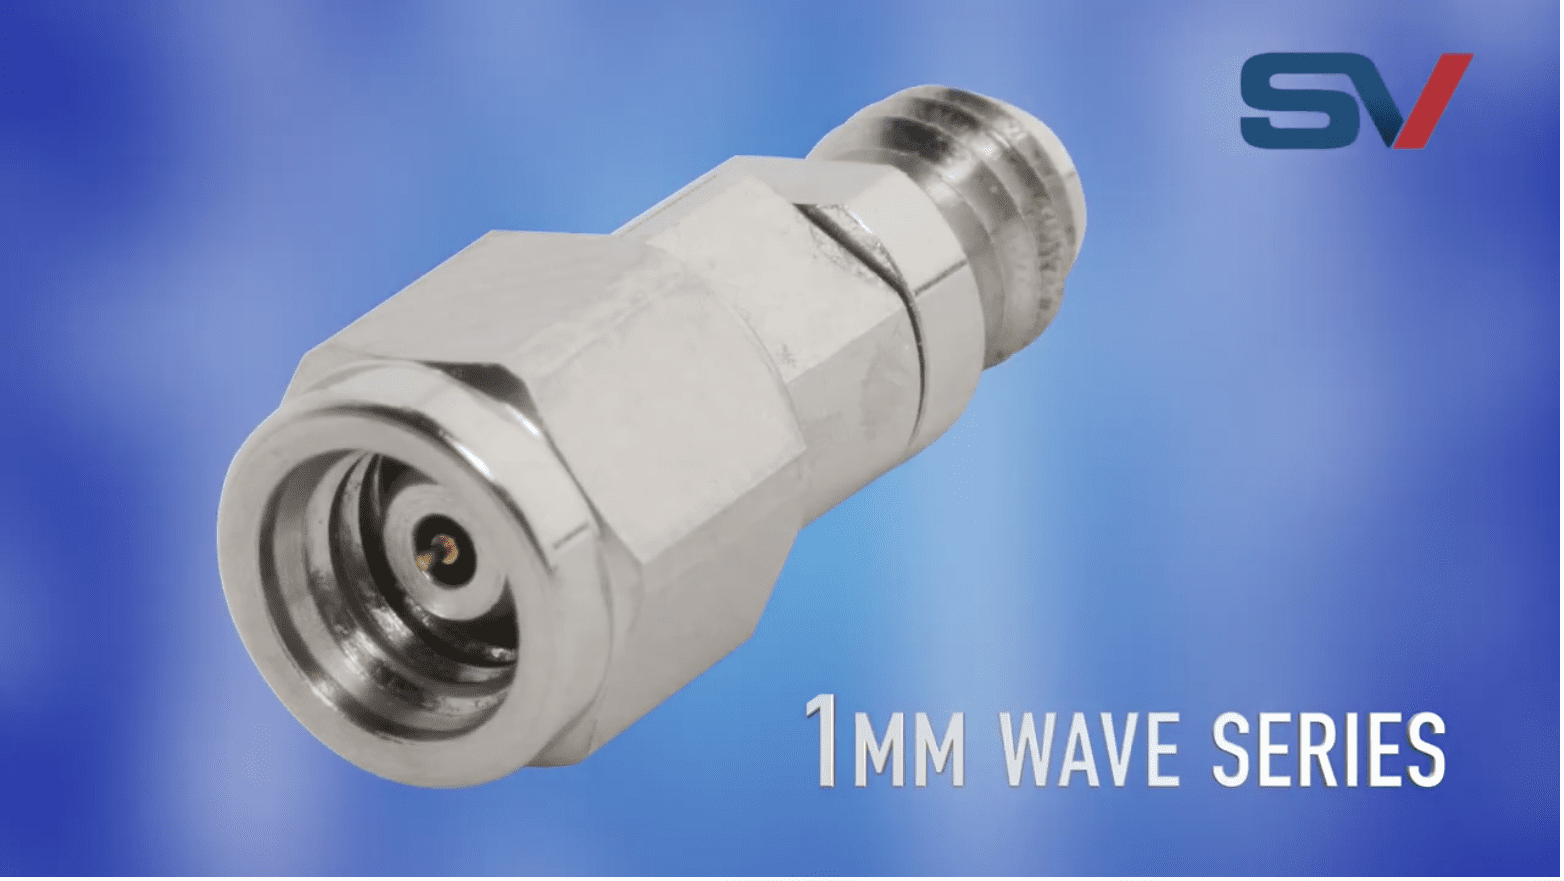 SV Microwave’s new 1 mm wave connector